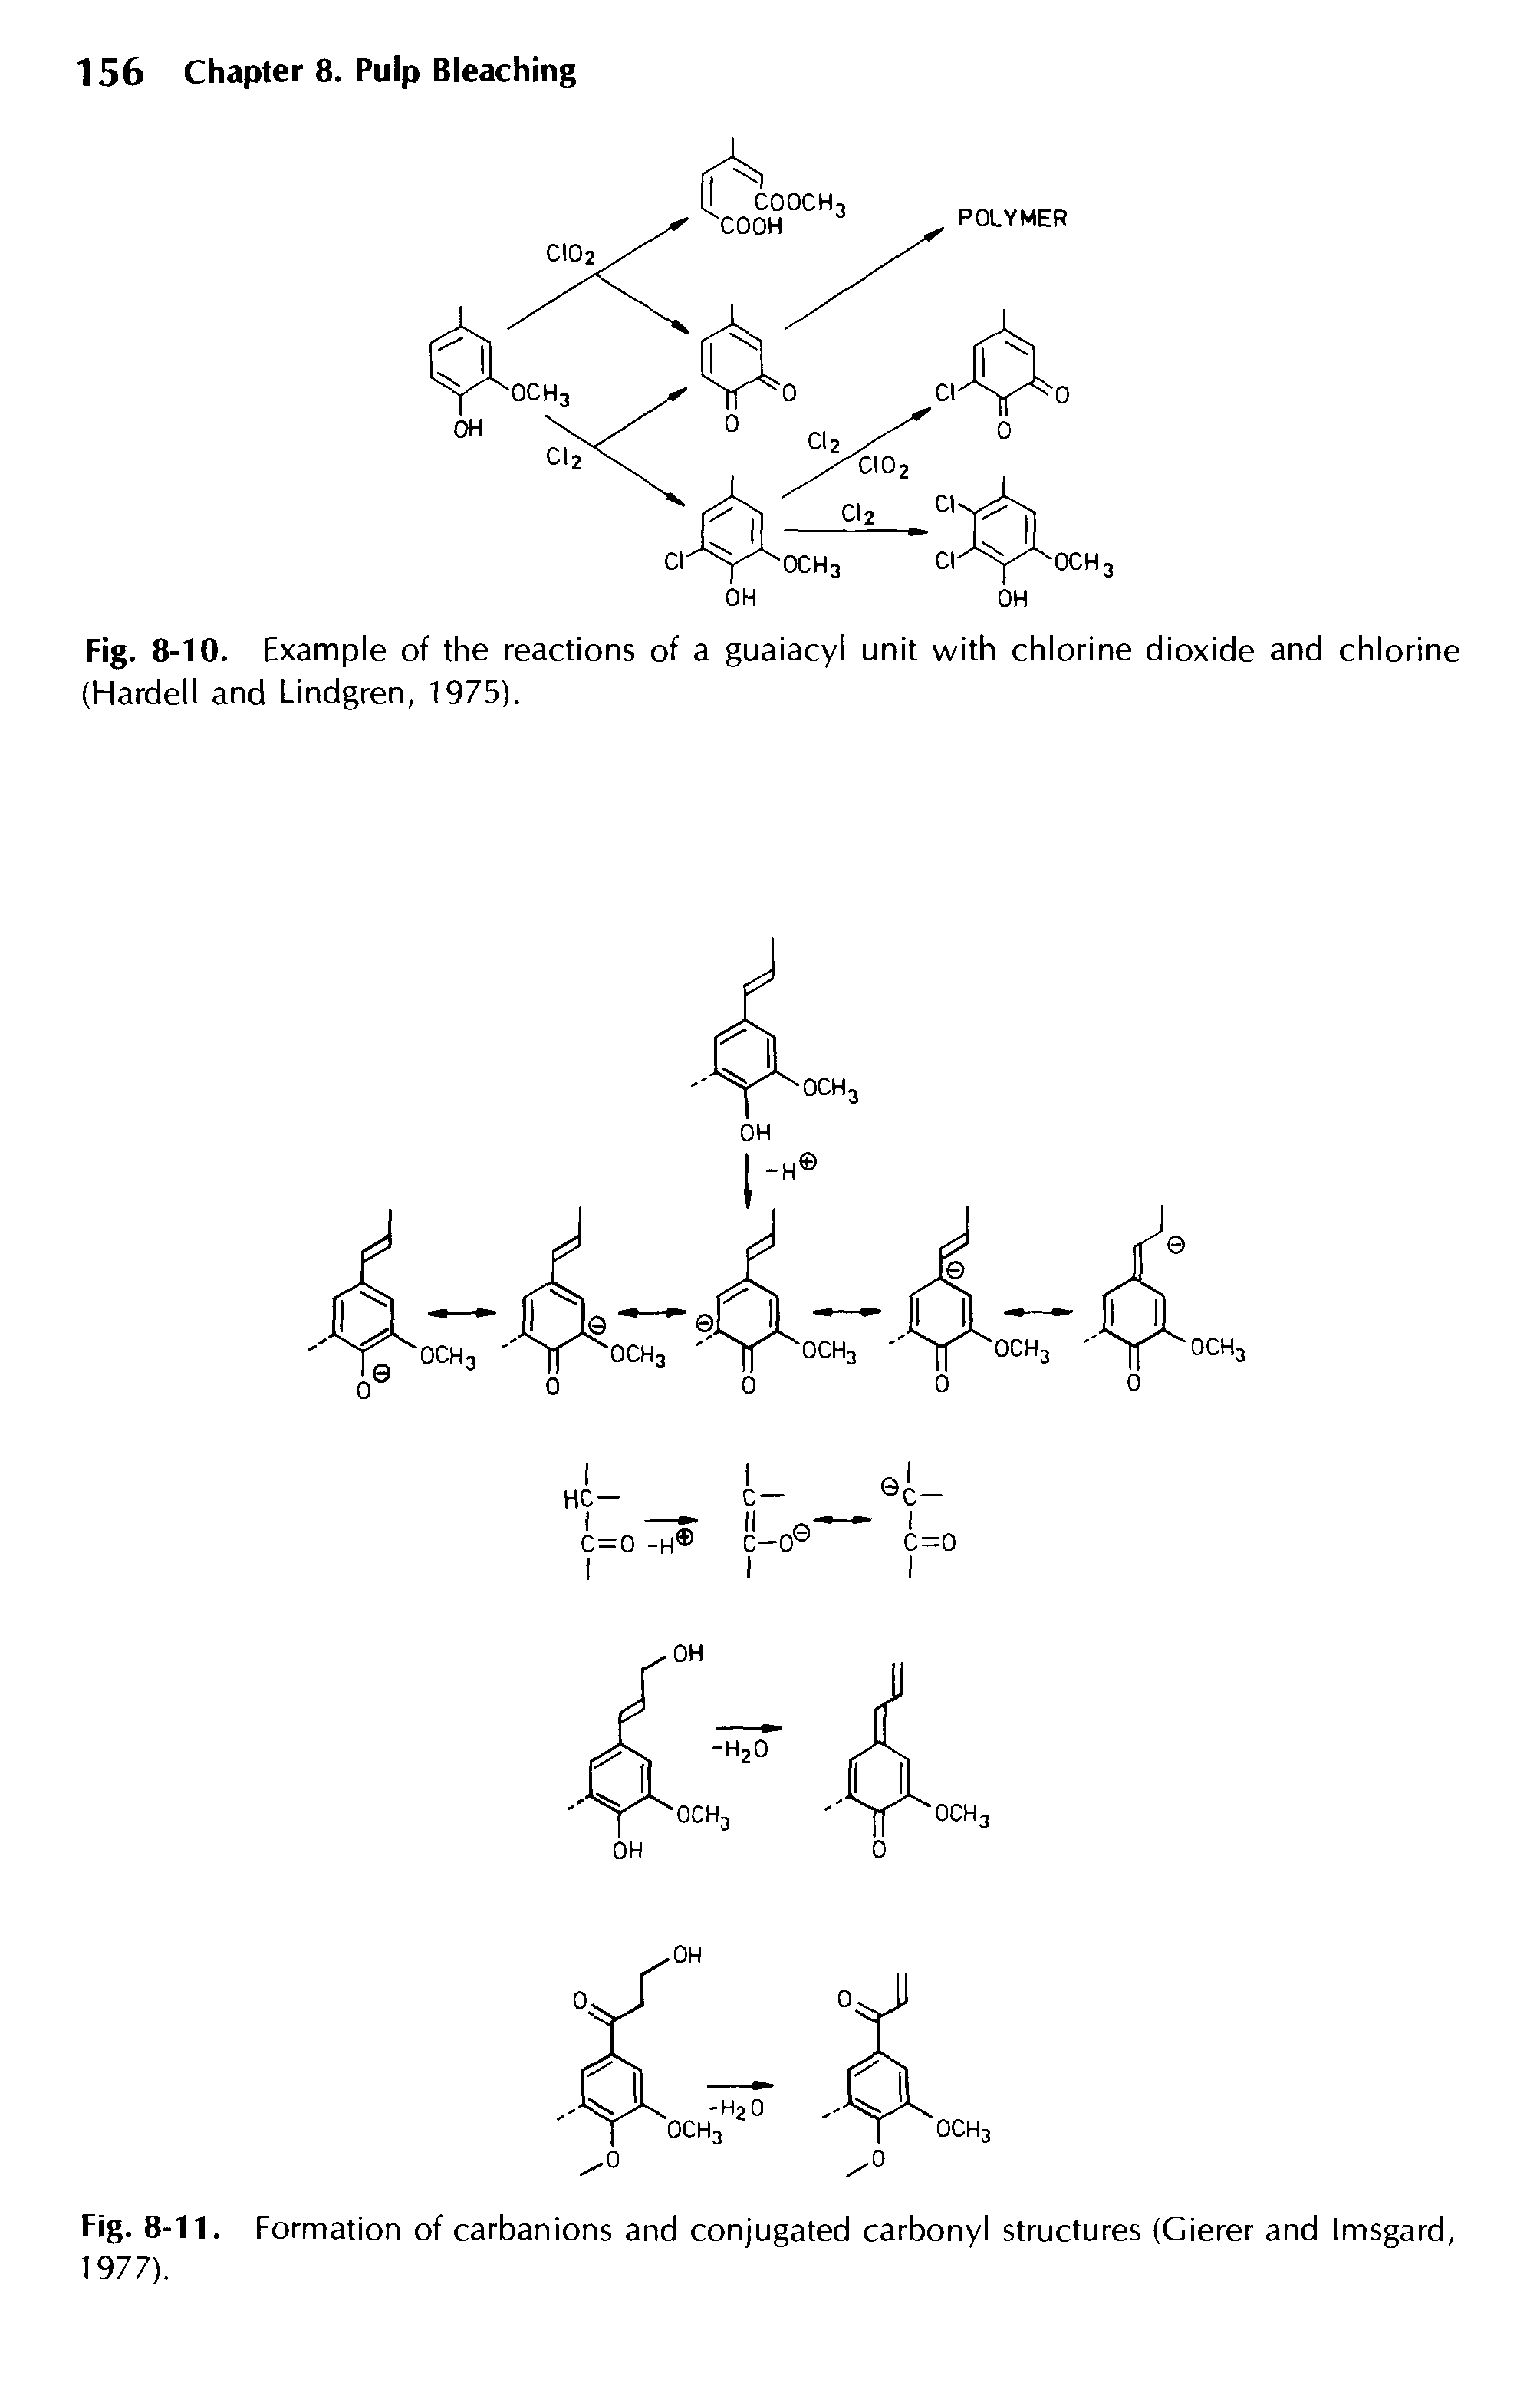 Fig. 8-11. Formation of carbanions and conjugated carbonyl structures (Gierer and Imsgard, 1977).